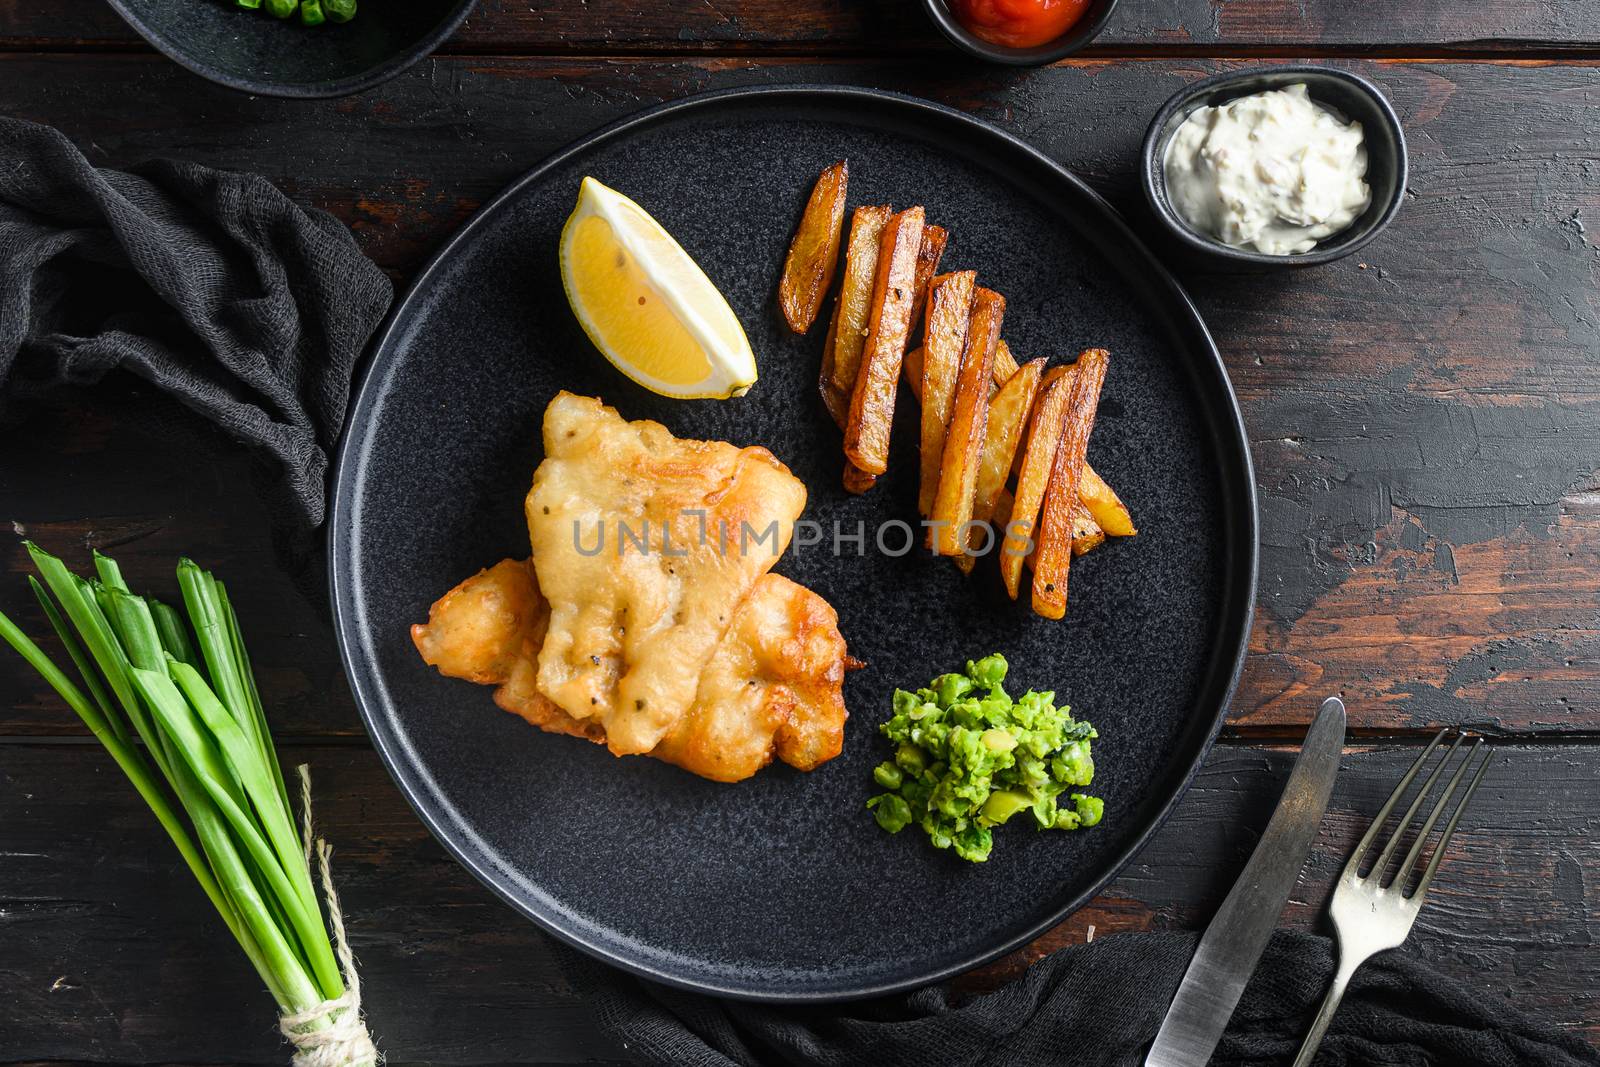 Fish and chips. Traditional british hot dish consisting of fried fish, potato chips, mushy peas and tartare sauce. served on black plate over old dark wood table in pub top view.